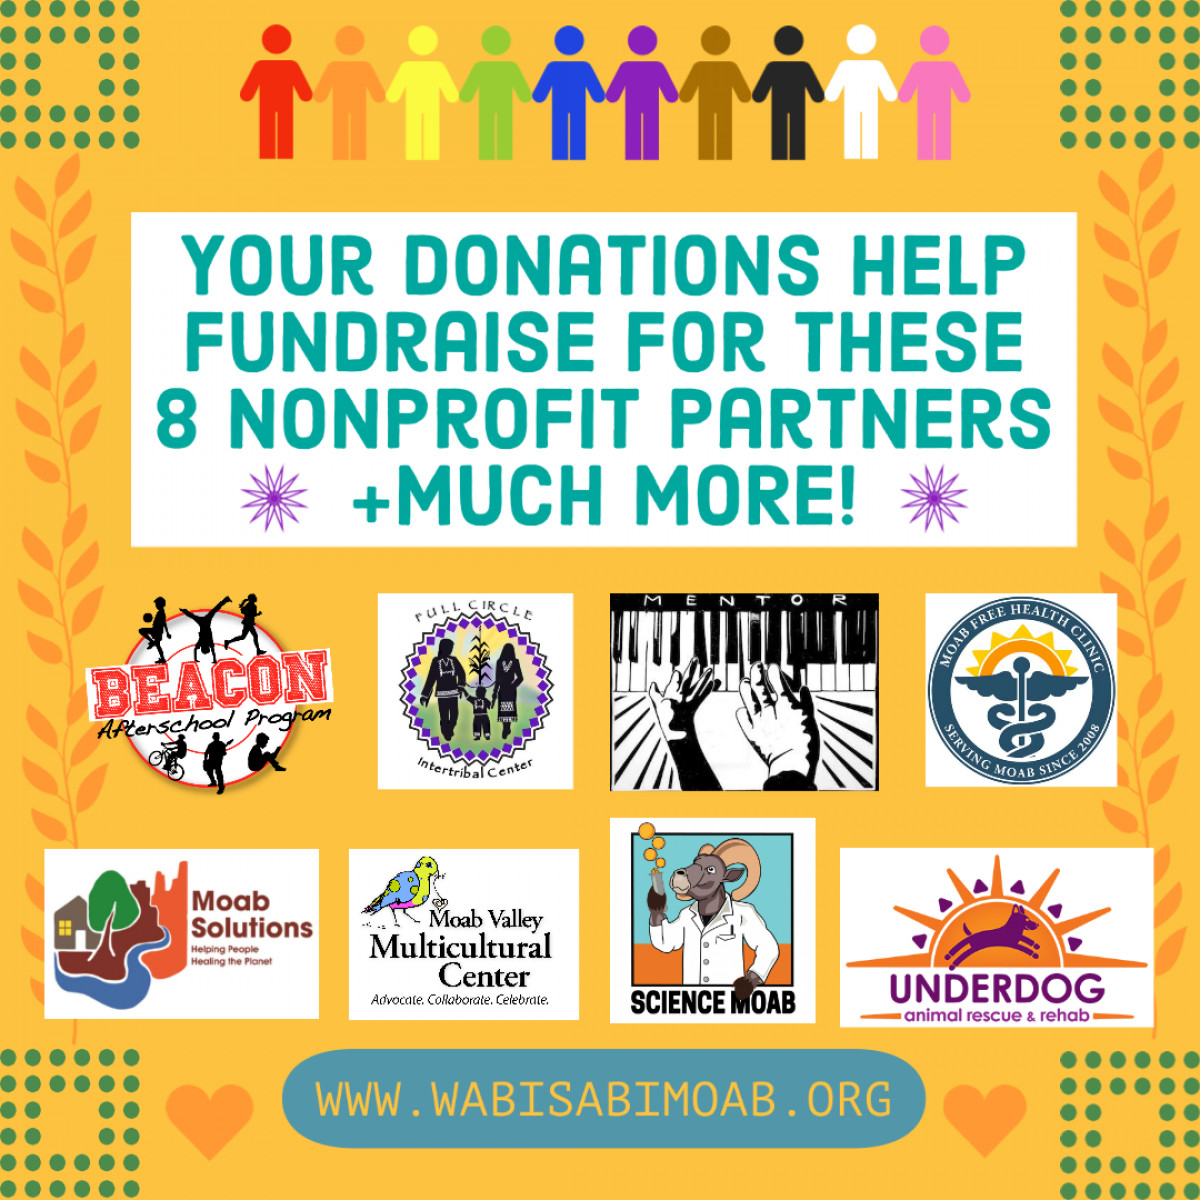 Your Donations Fundraise for Nonprofits!